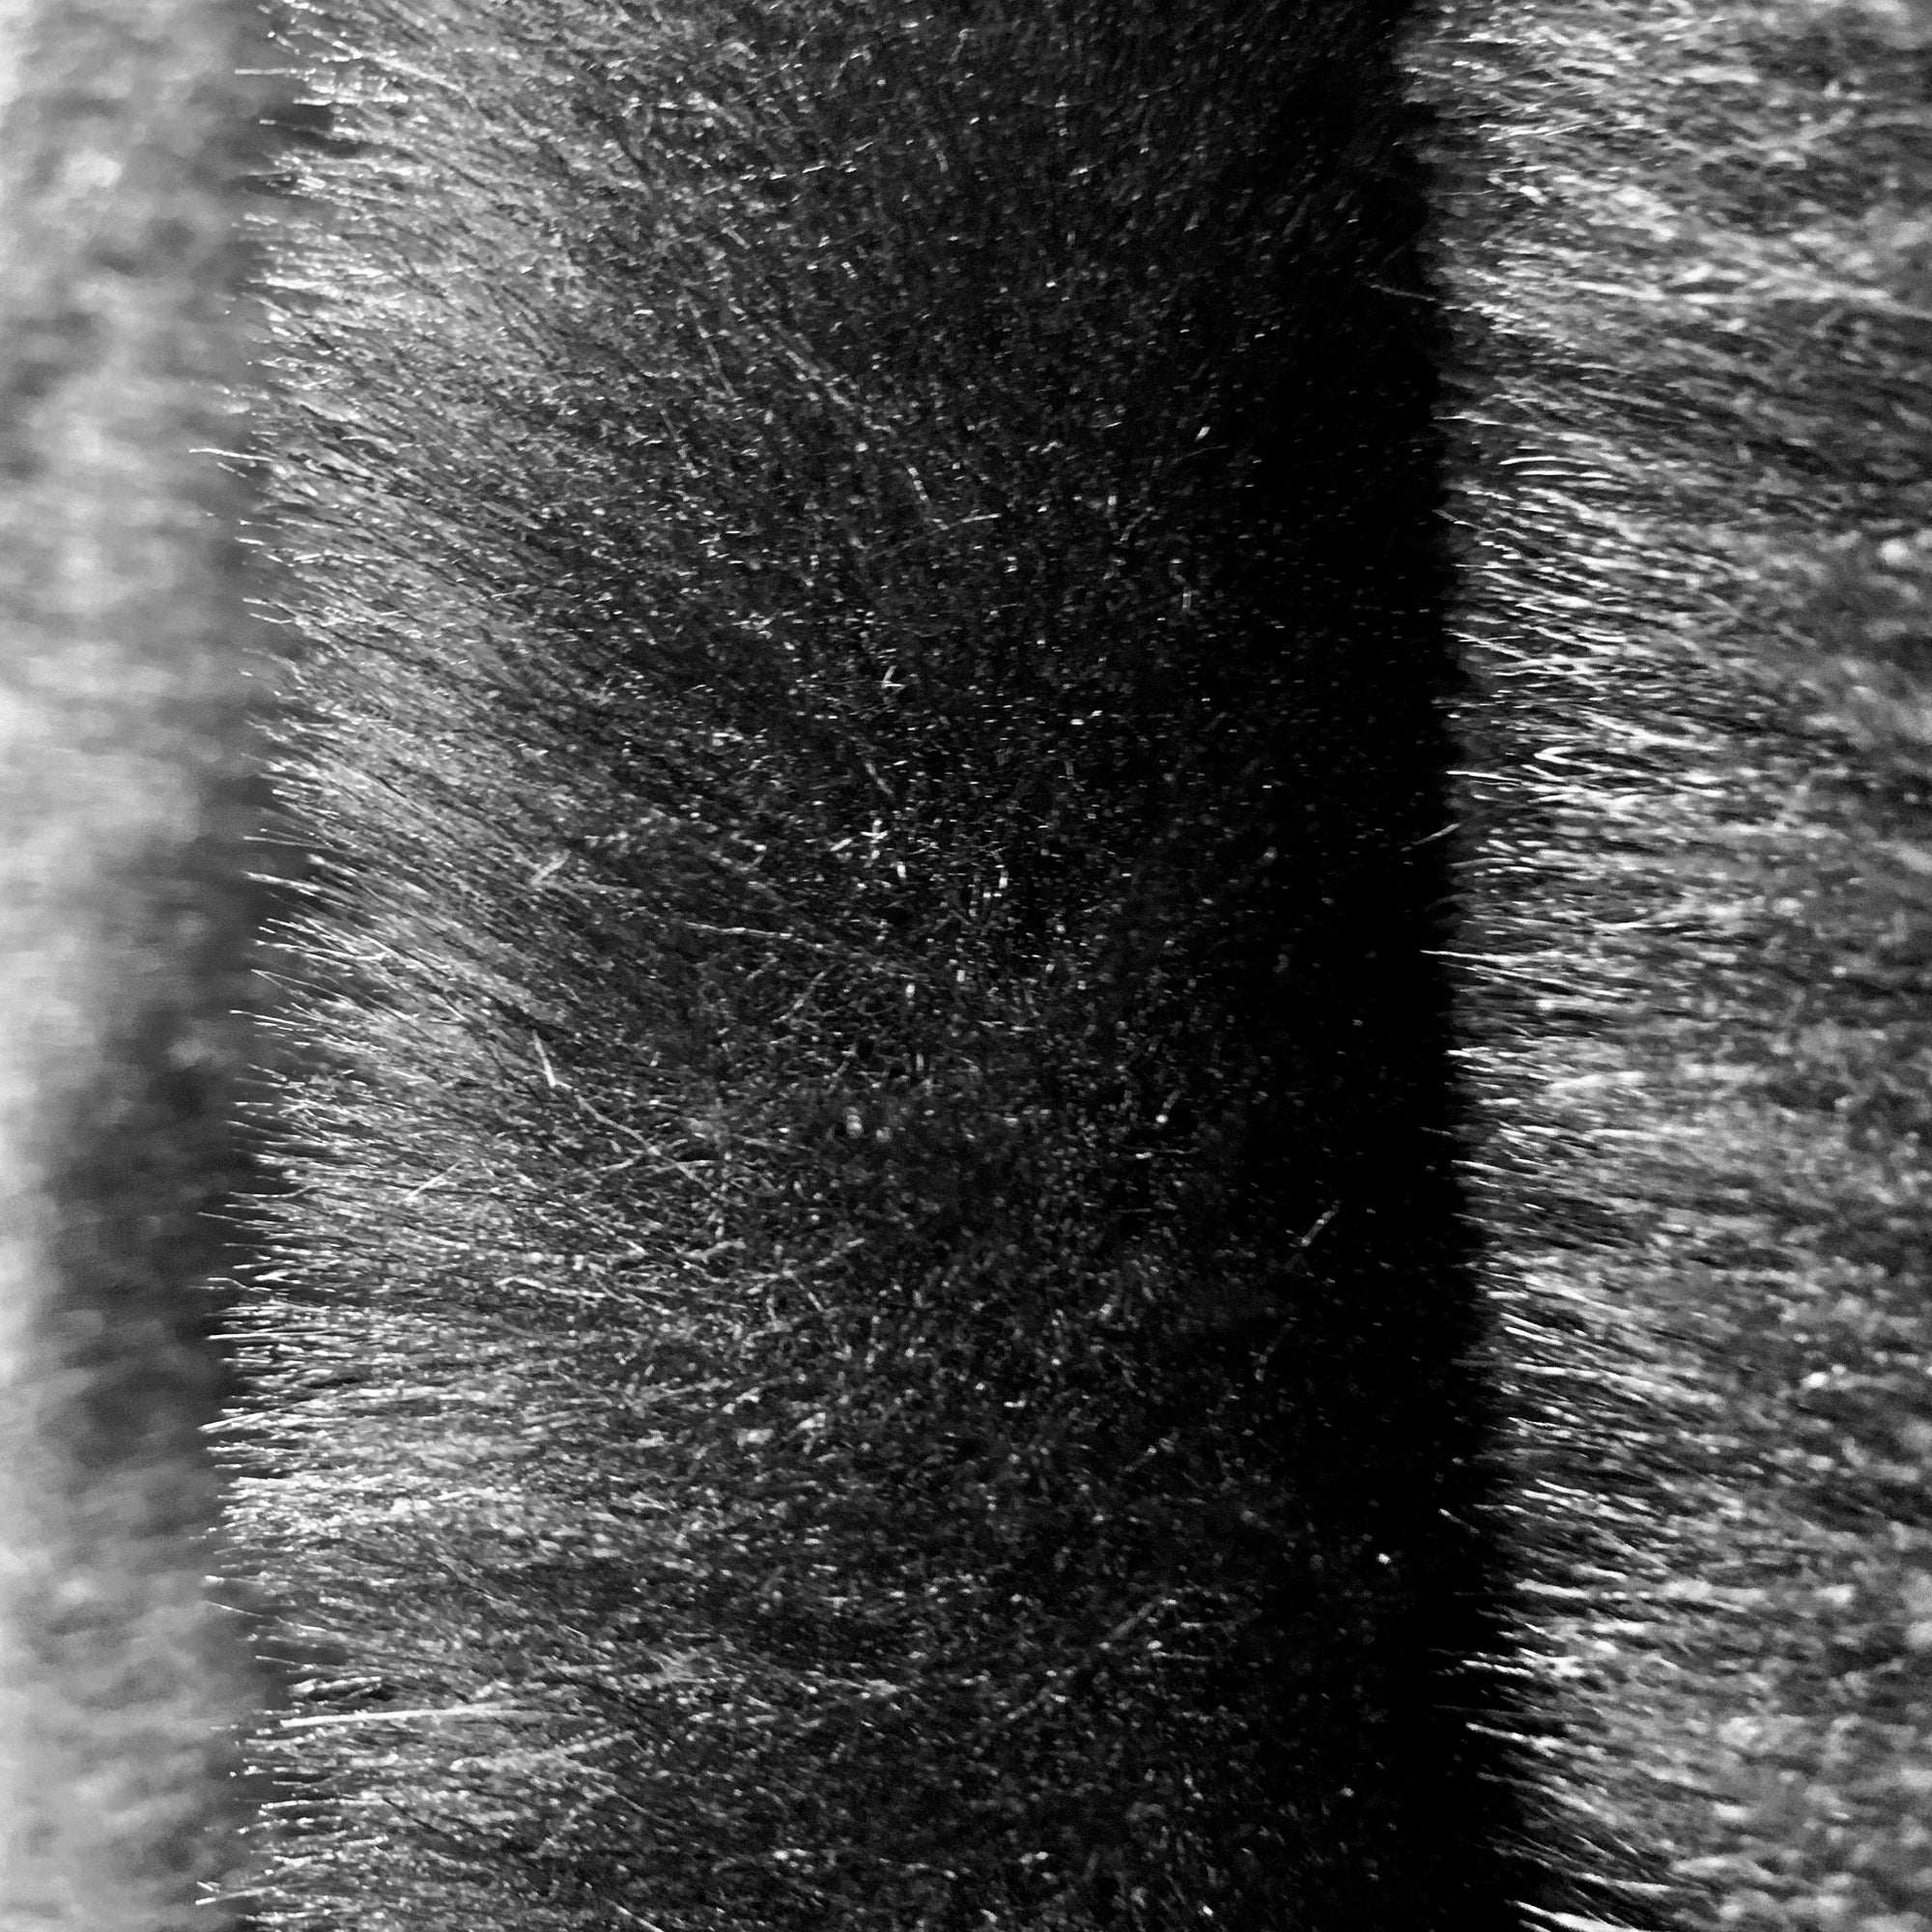 Zahra BLACK 0.75 Inch Short Pile Soft Faux Fur Fabric for Fursuit, Cosplay Costume, Photo Prop, Trim, Throw Pillow, Crafts